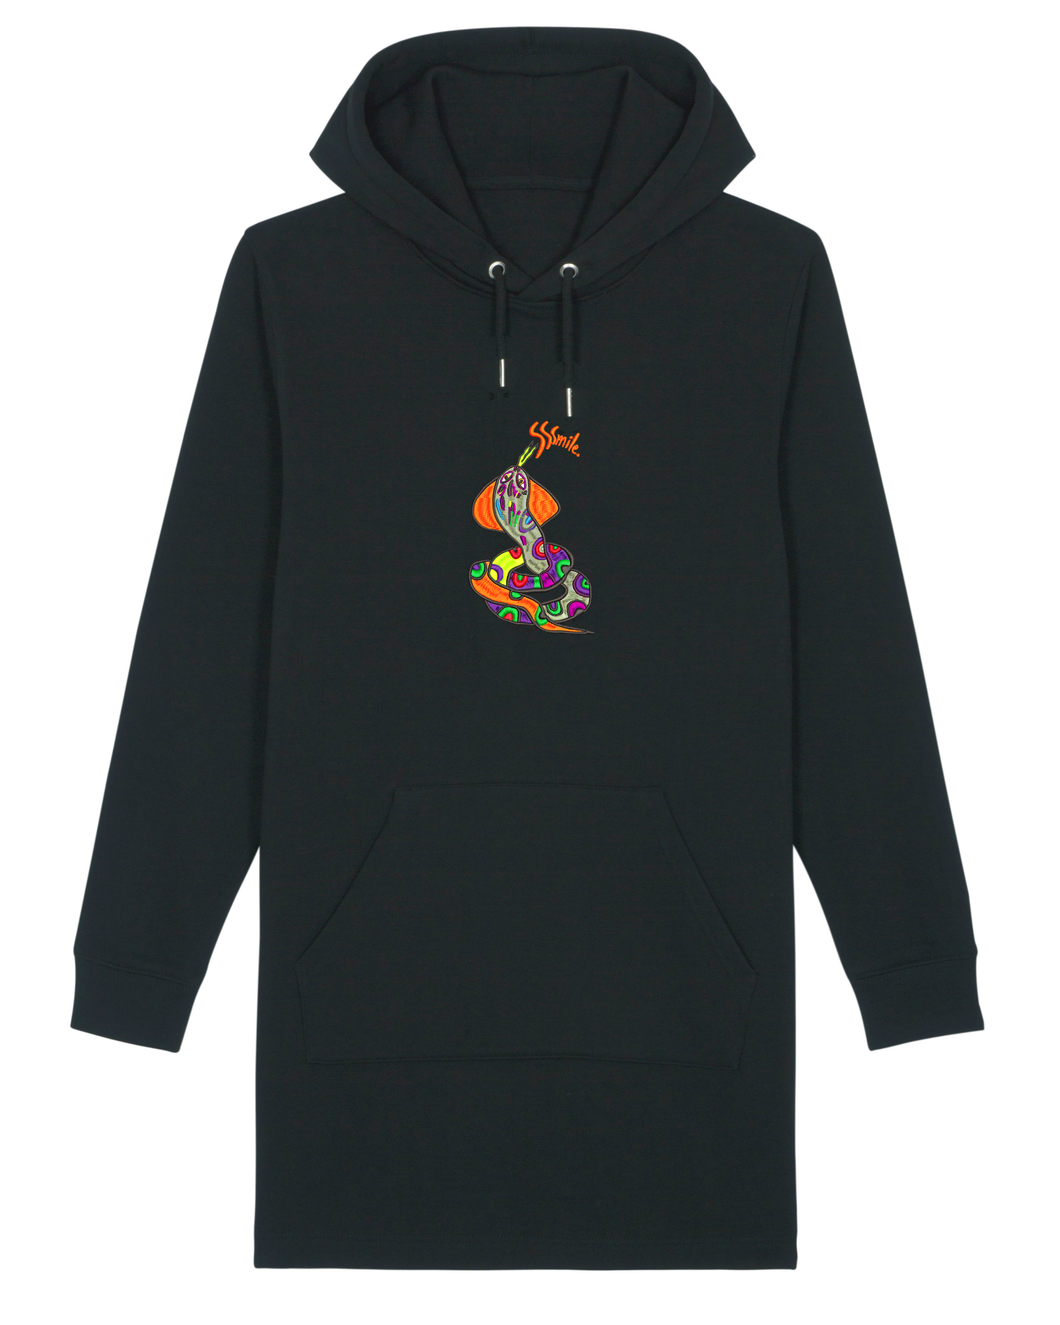 Sssmile 🐍 - Embroidered WOMEN'S HOODIE DRESS